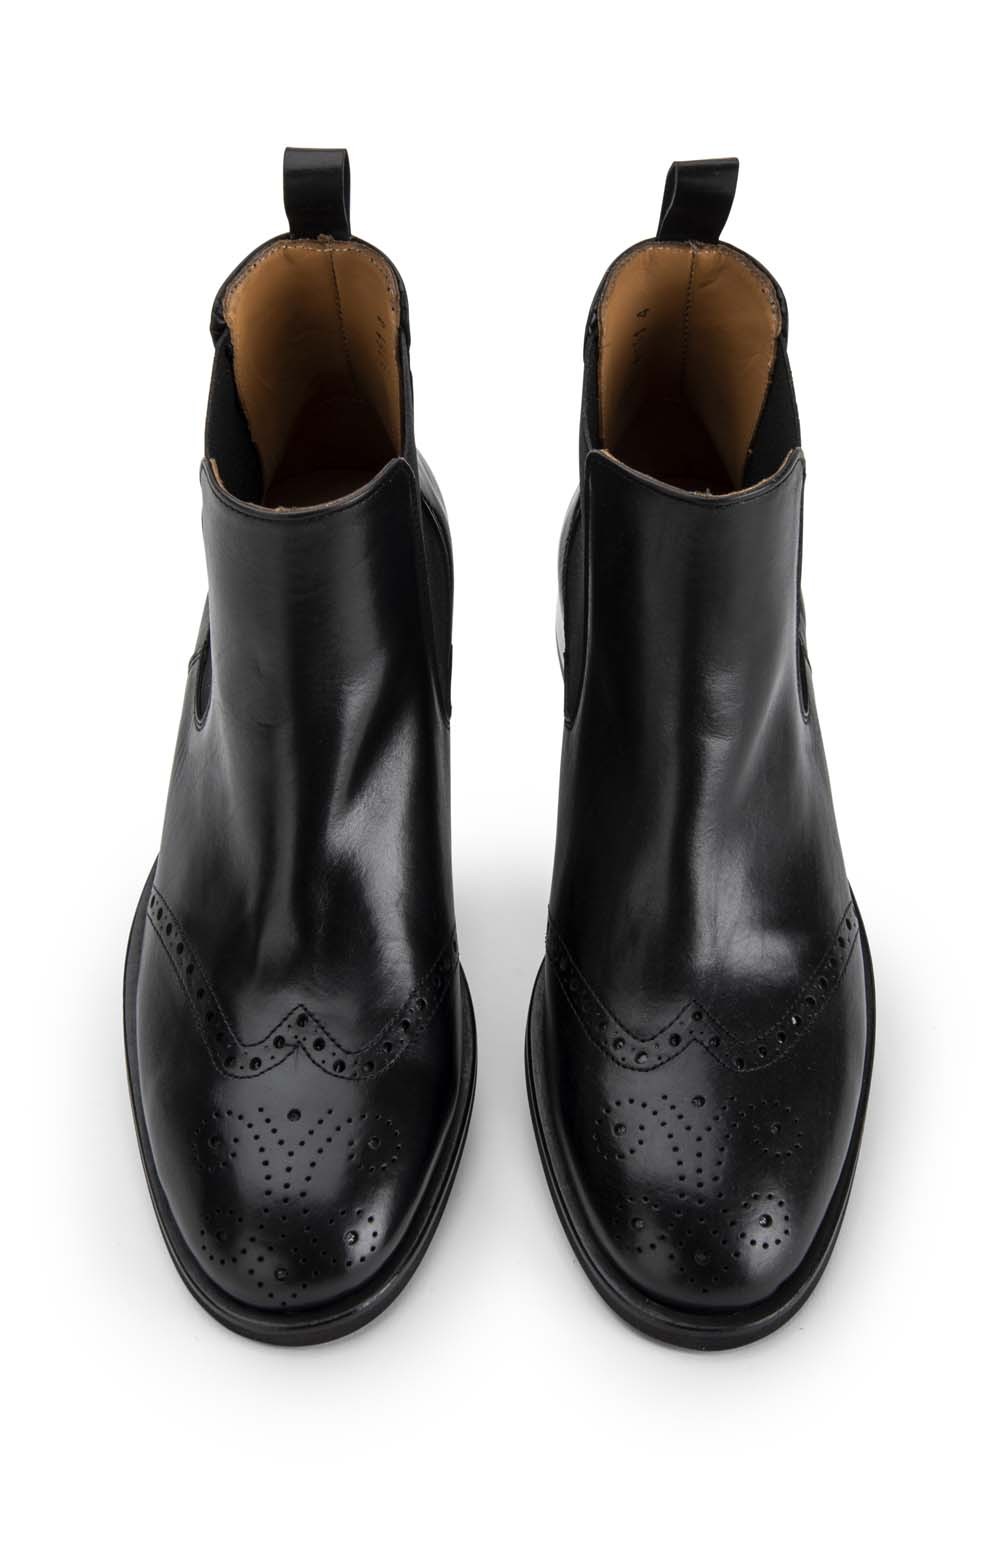 black brogue ankle boots